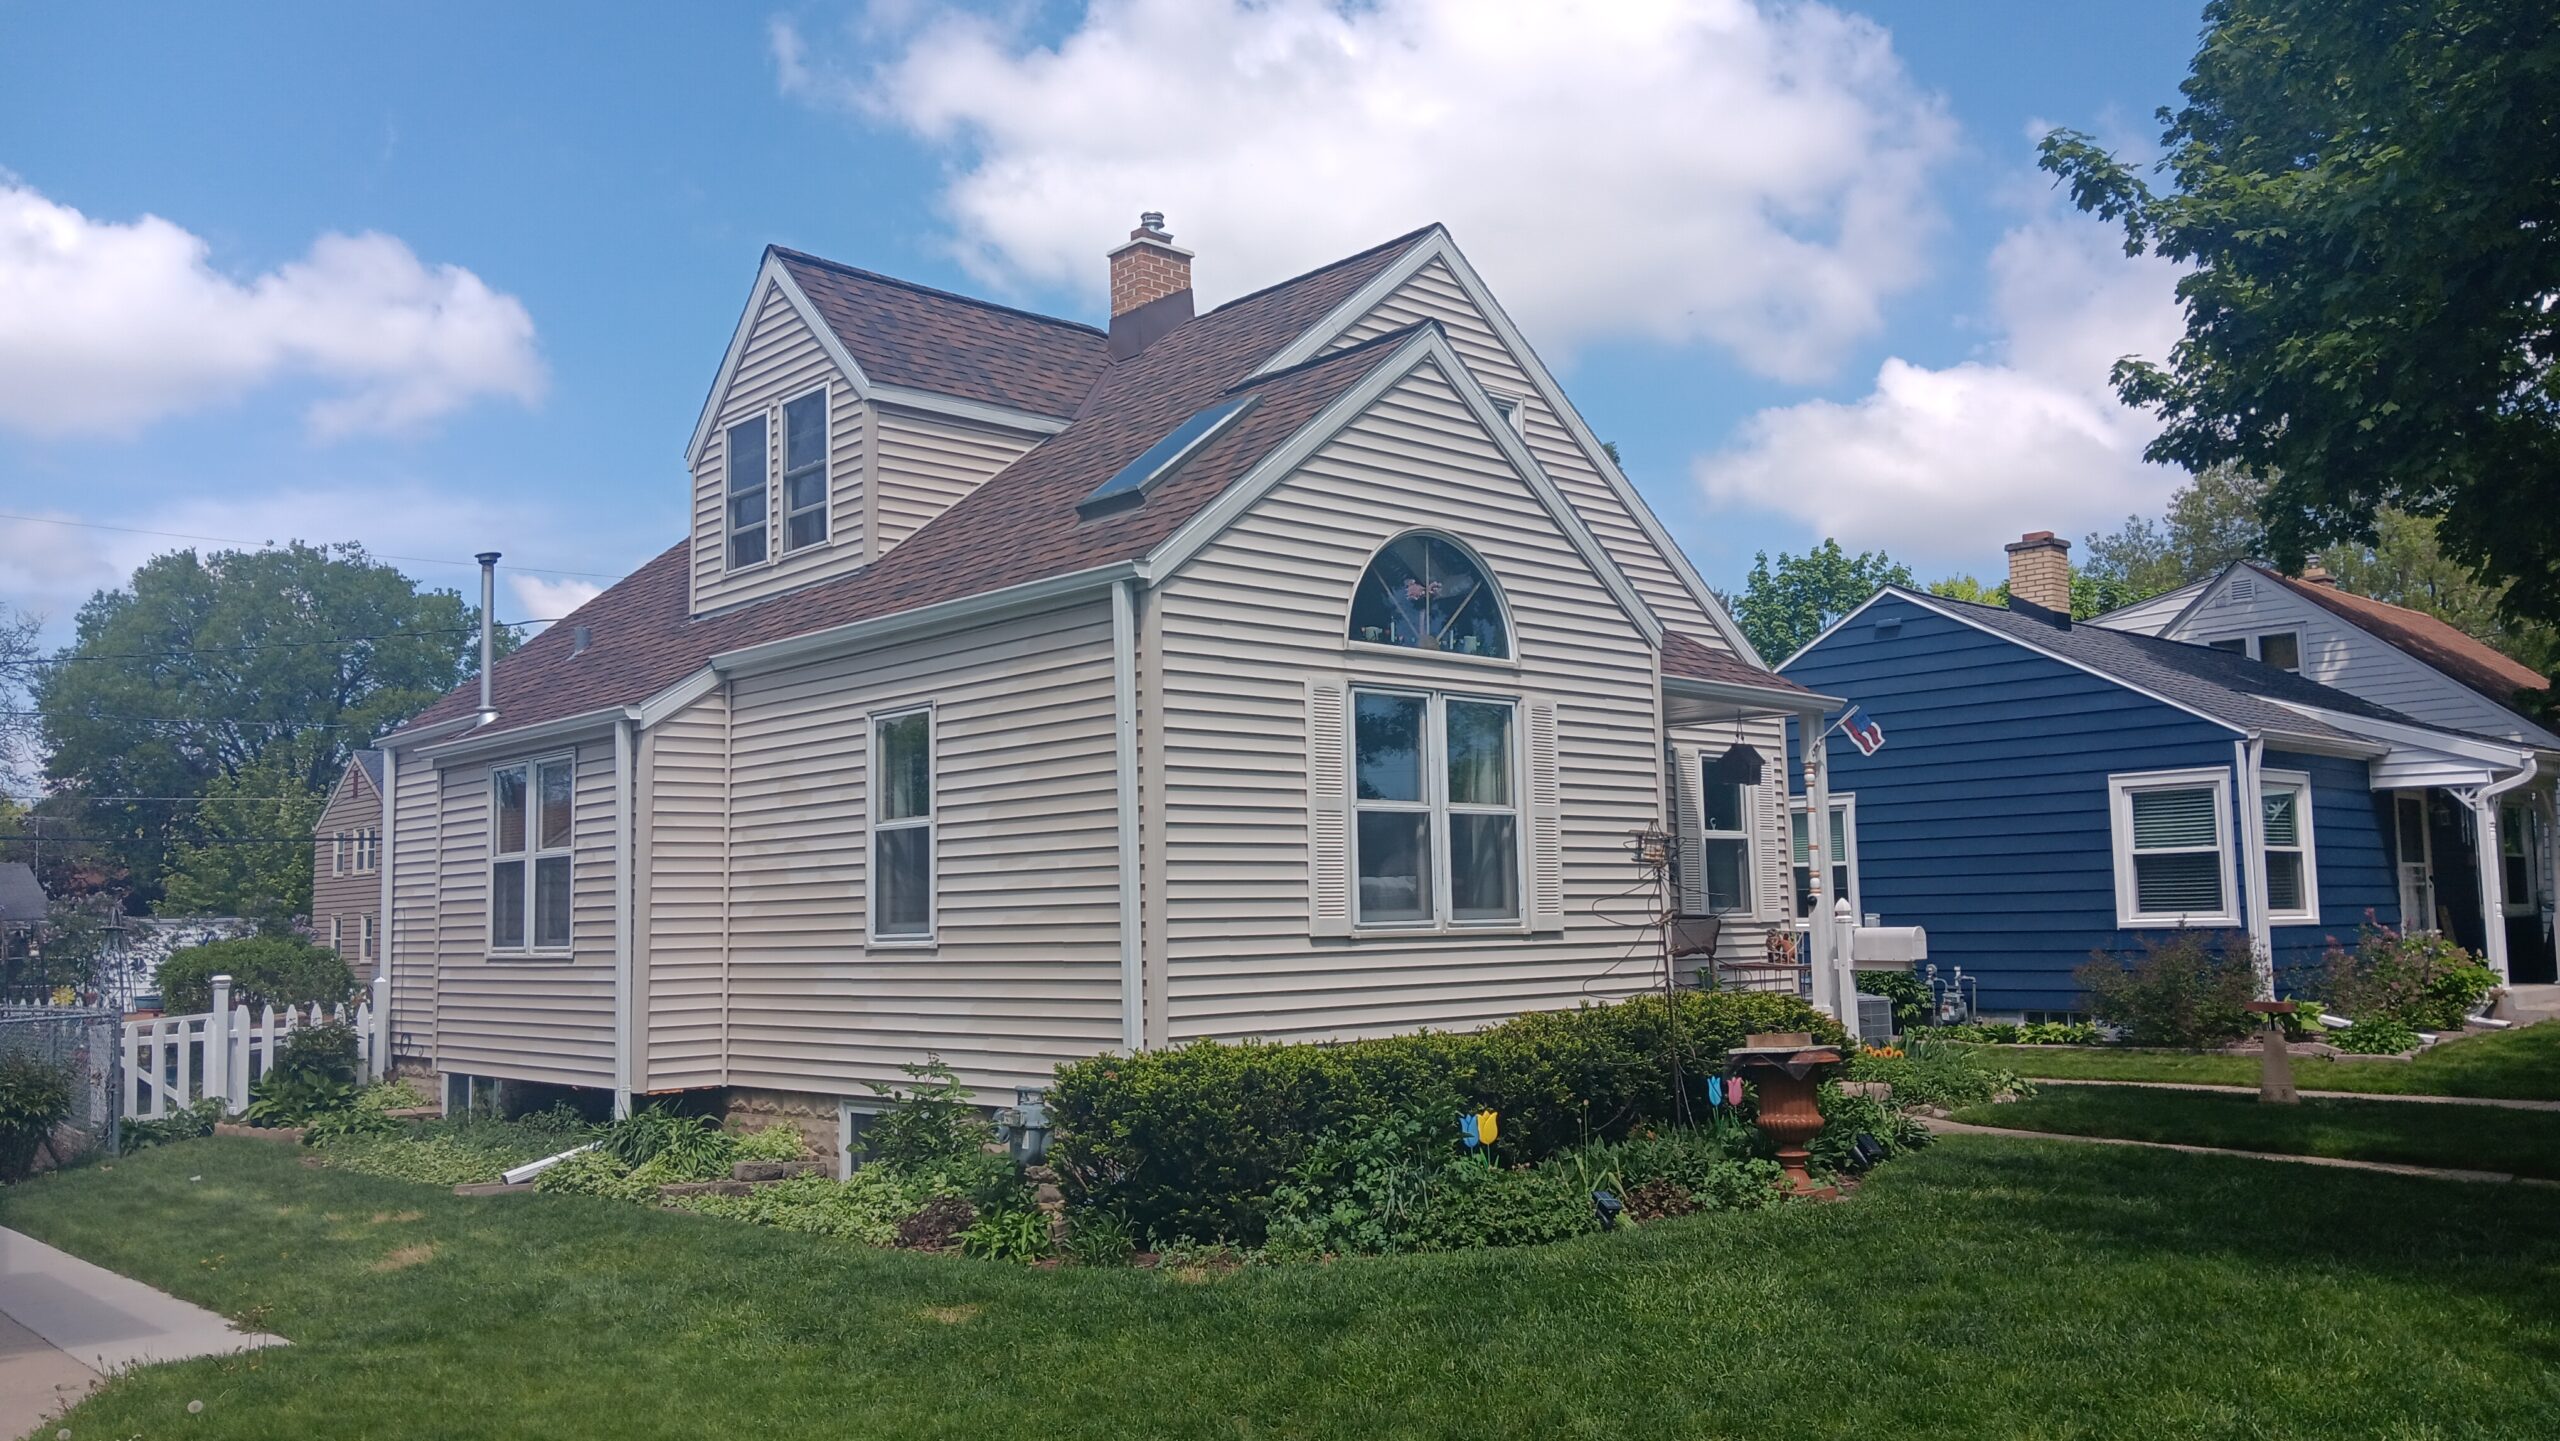 Waukesha roofing services project - after